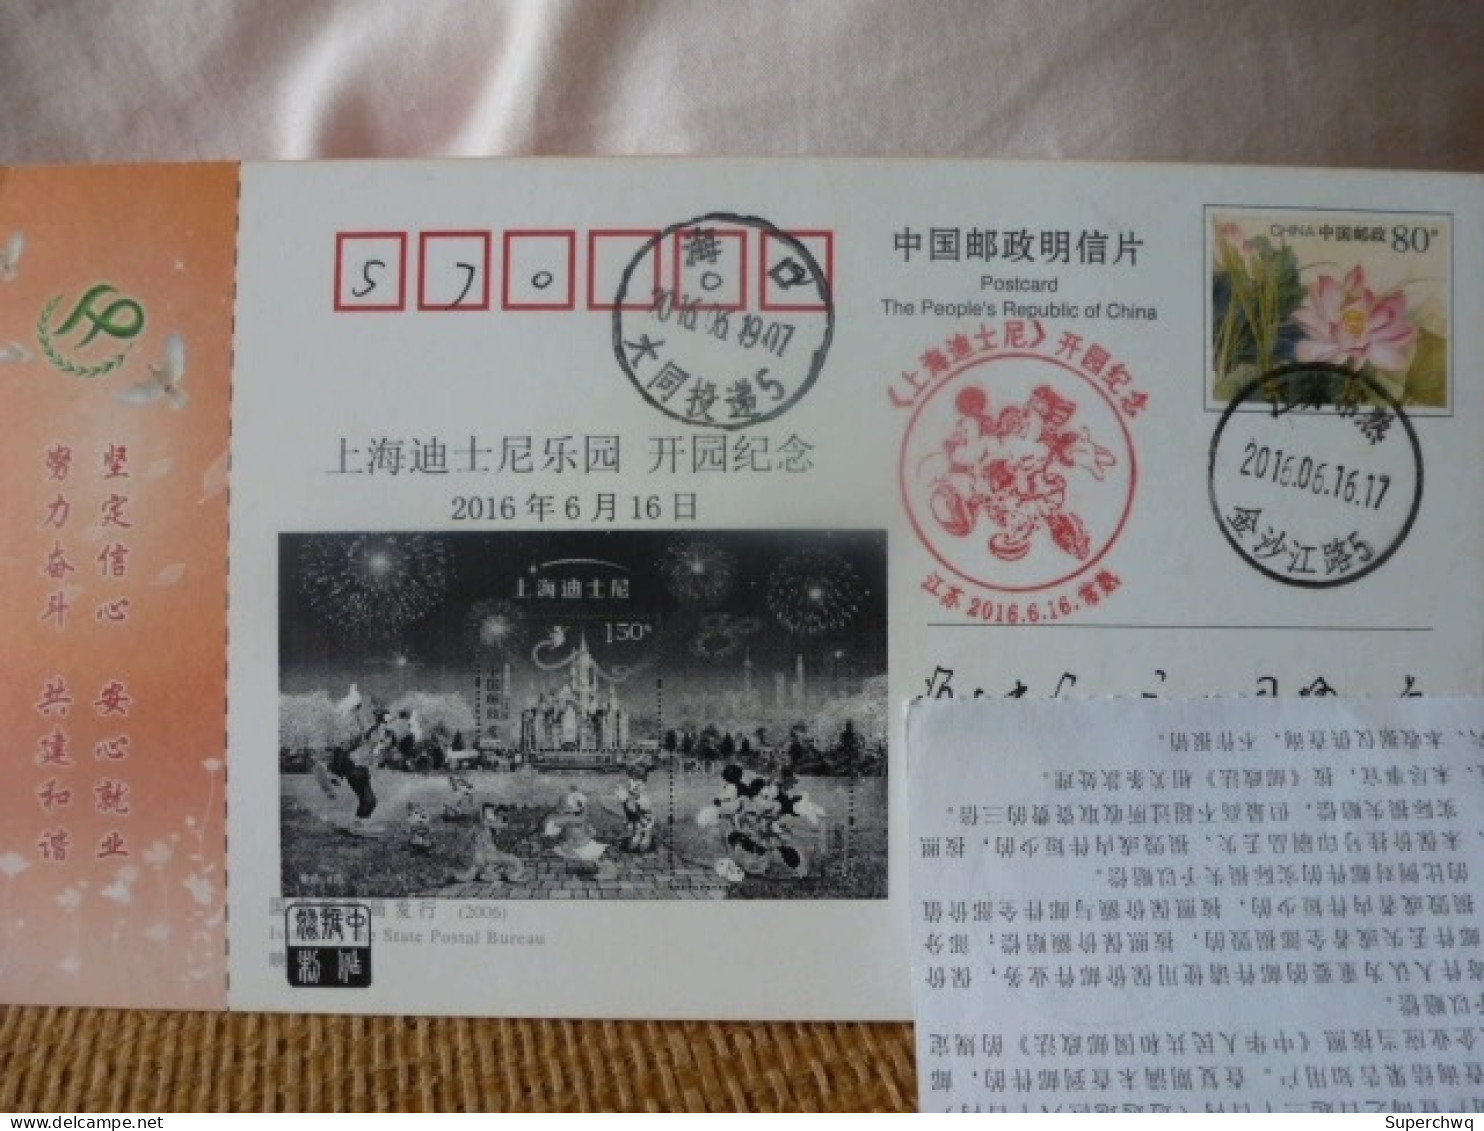 China Posted Postcard,with Shanghai Disney Postmark - Cartes Postales